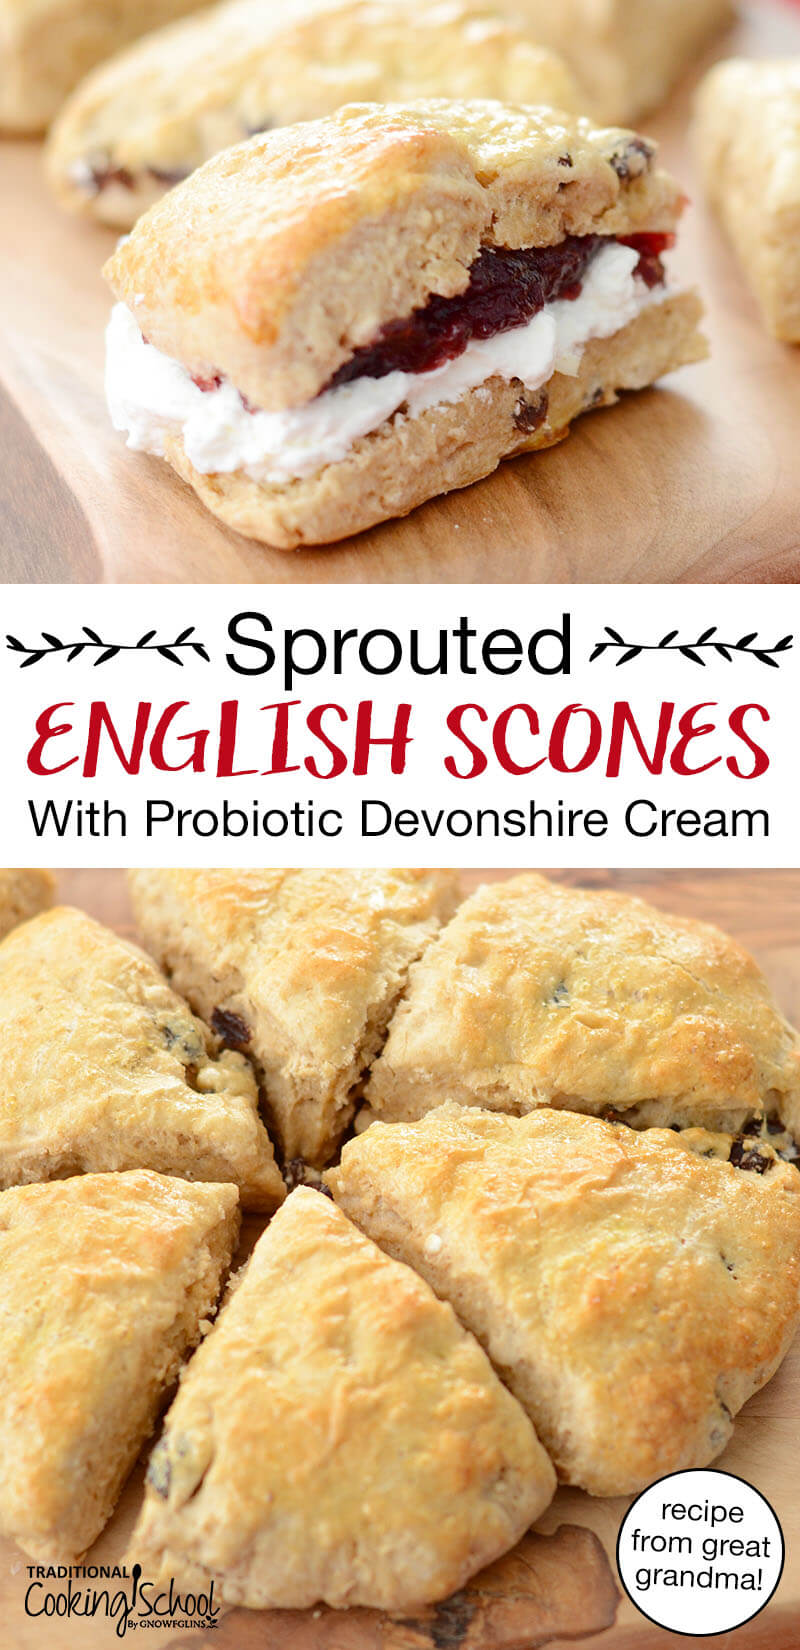 photo collage of scones spread with cream and jam, with text overlay: "Sprouted English Scones With Probiotic Devonshire Cream (recipe from great grandma!)"